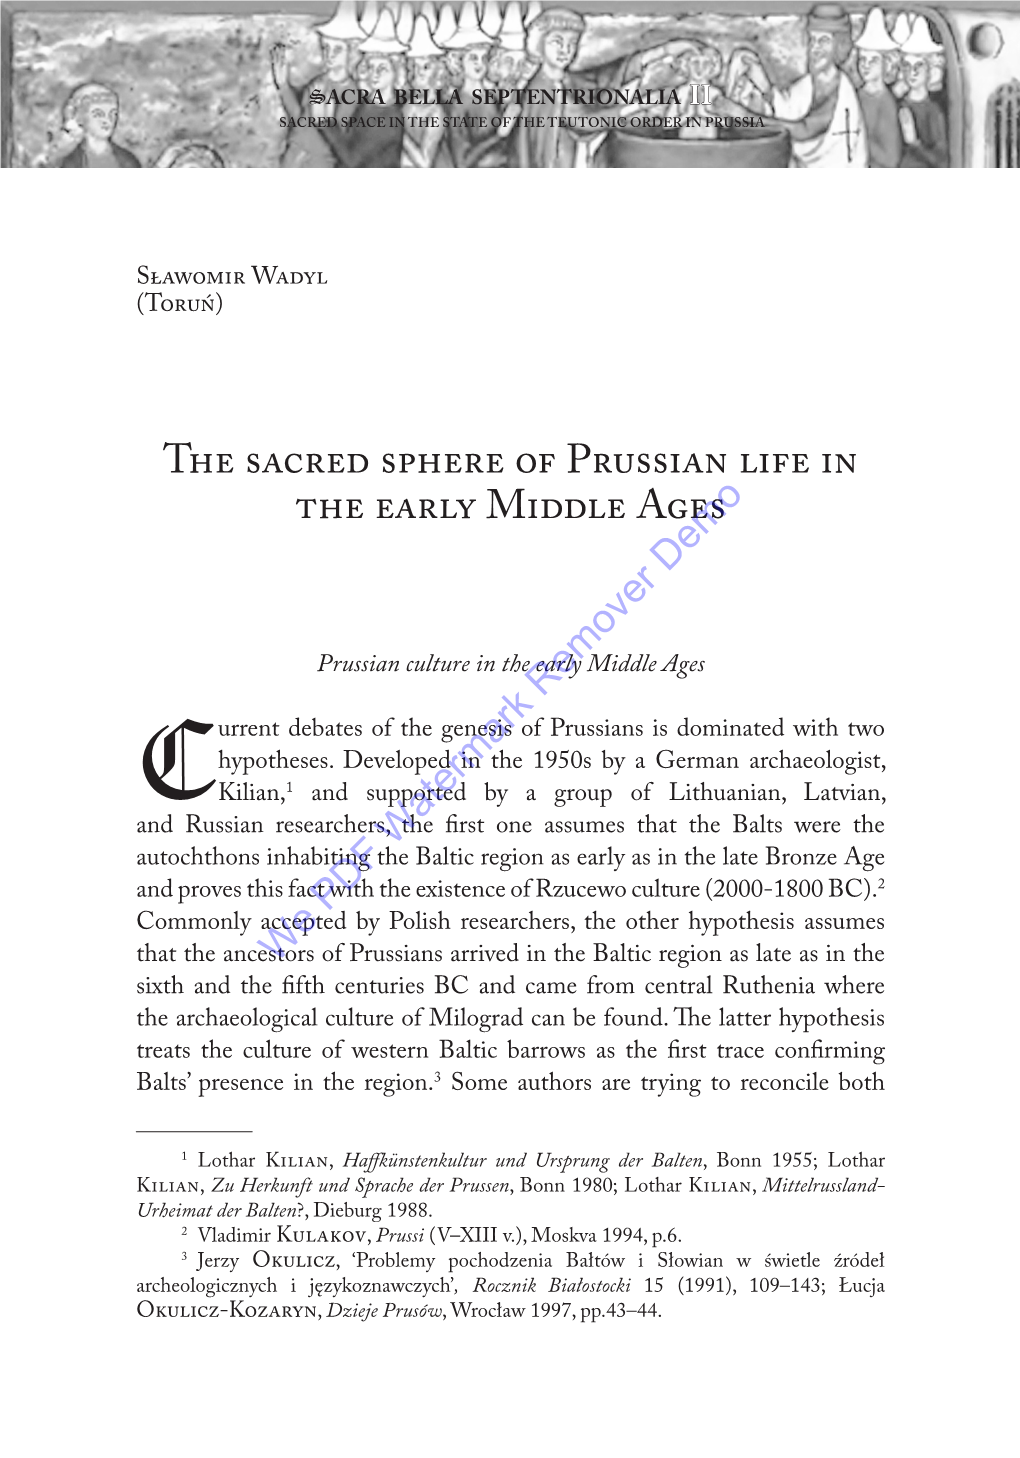 The Sacred Sphere of Prussian Life in the Early Middle Ages.Pdf